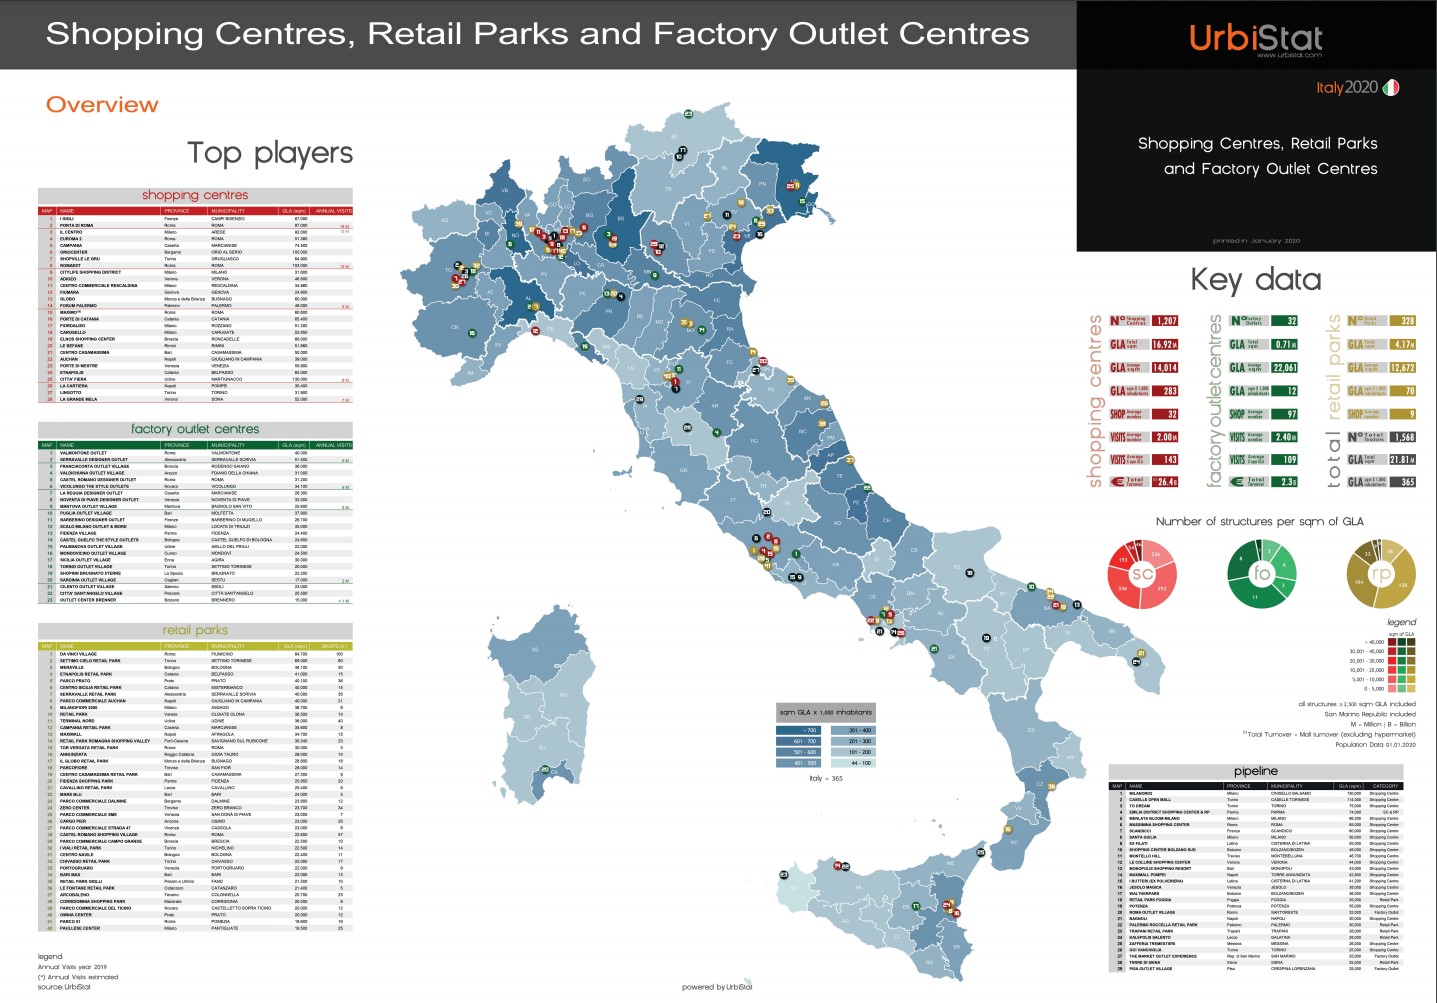 POSTER – SHOPPING CENTRES, RETAIL PARKS AND FACTORY OUTLET CENTRES in Italia 2020